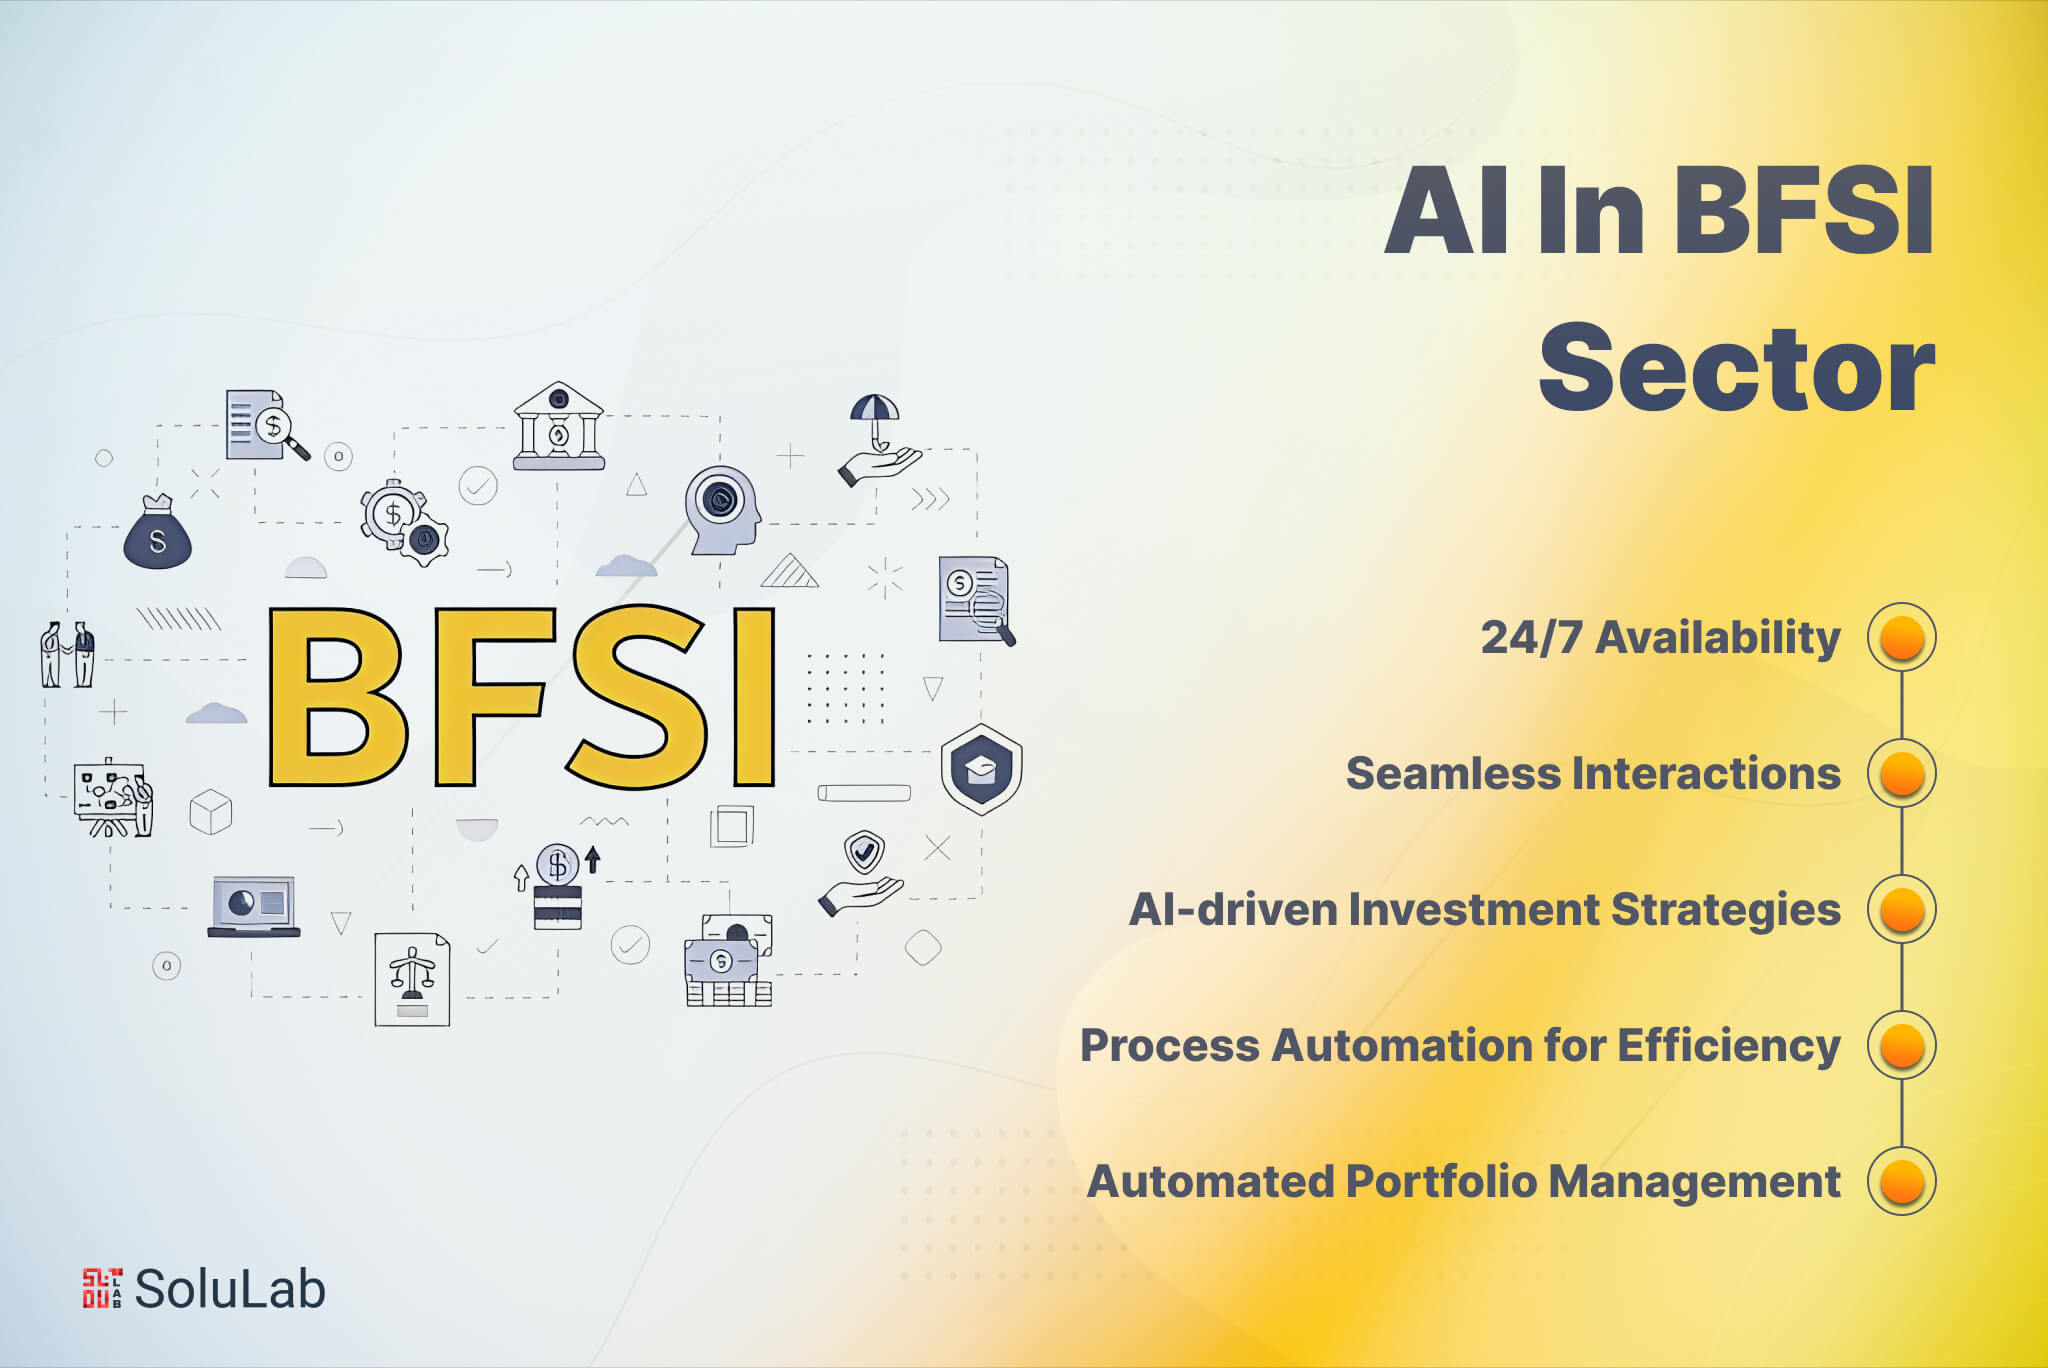 AI is Transforming the BFSI Sector